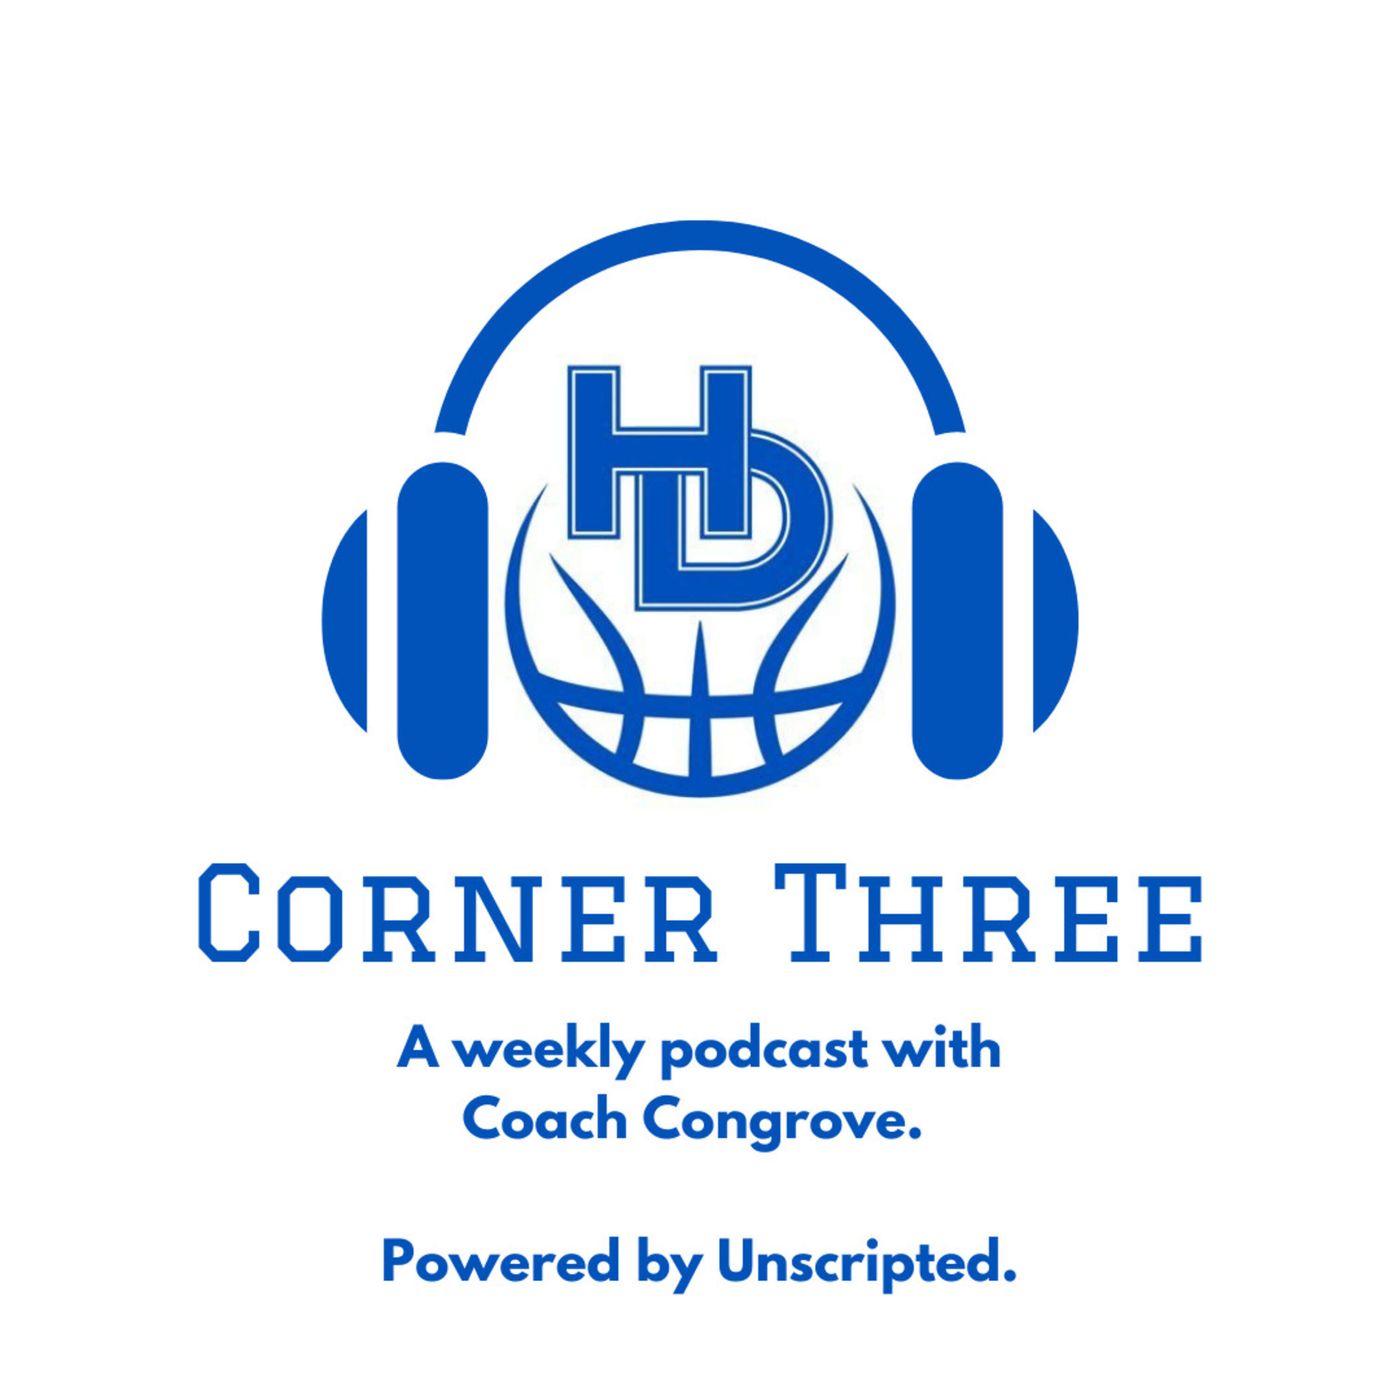 Corner Three Podcast - Powered by Unscripted